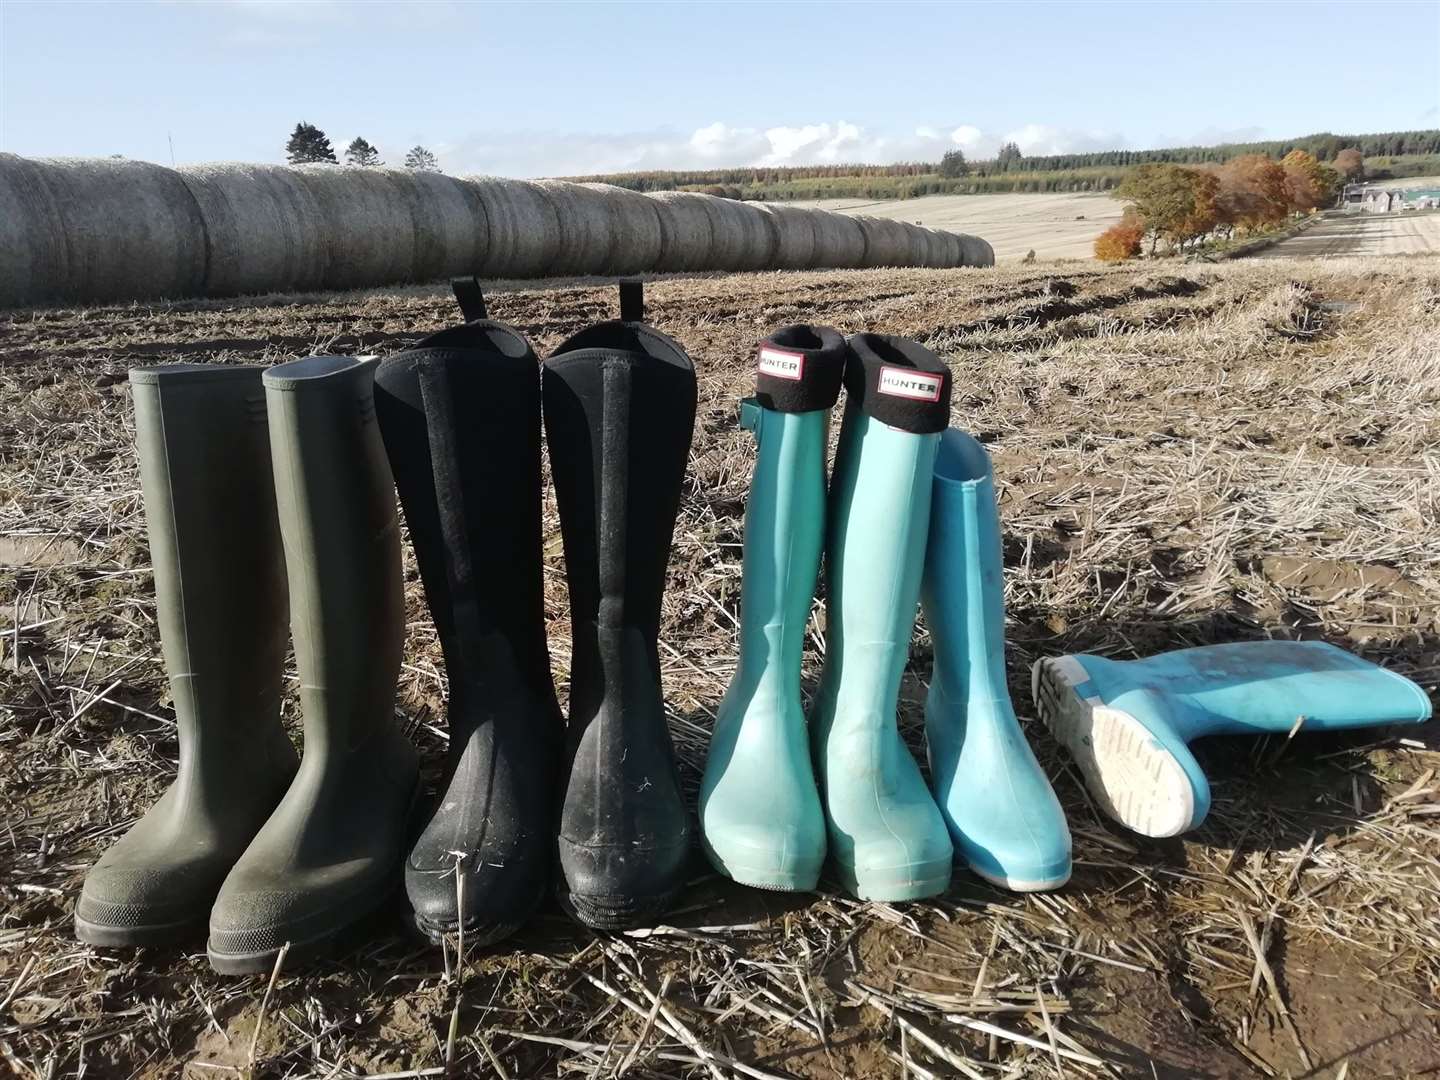 Joanna Lipp (13) was named junior winner for this images of a row of wellie boots on a Black Isle farm.